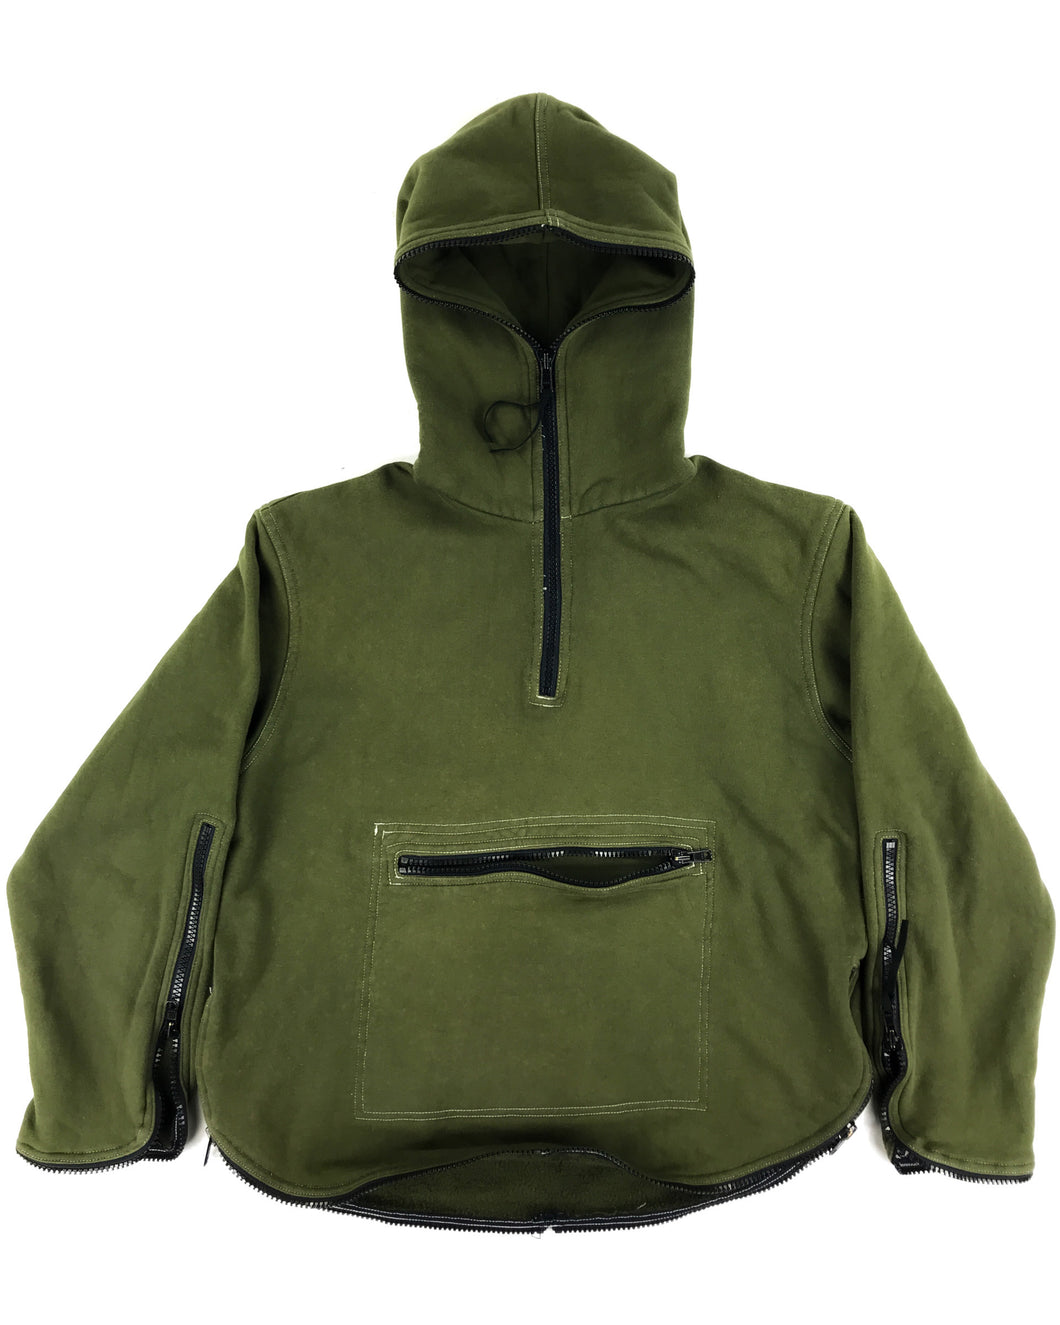 HOGGS (NEPENTHES) Full Zip Hoodie (90’s)(M)